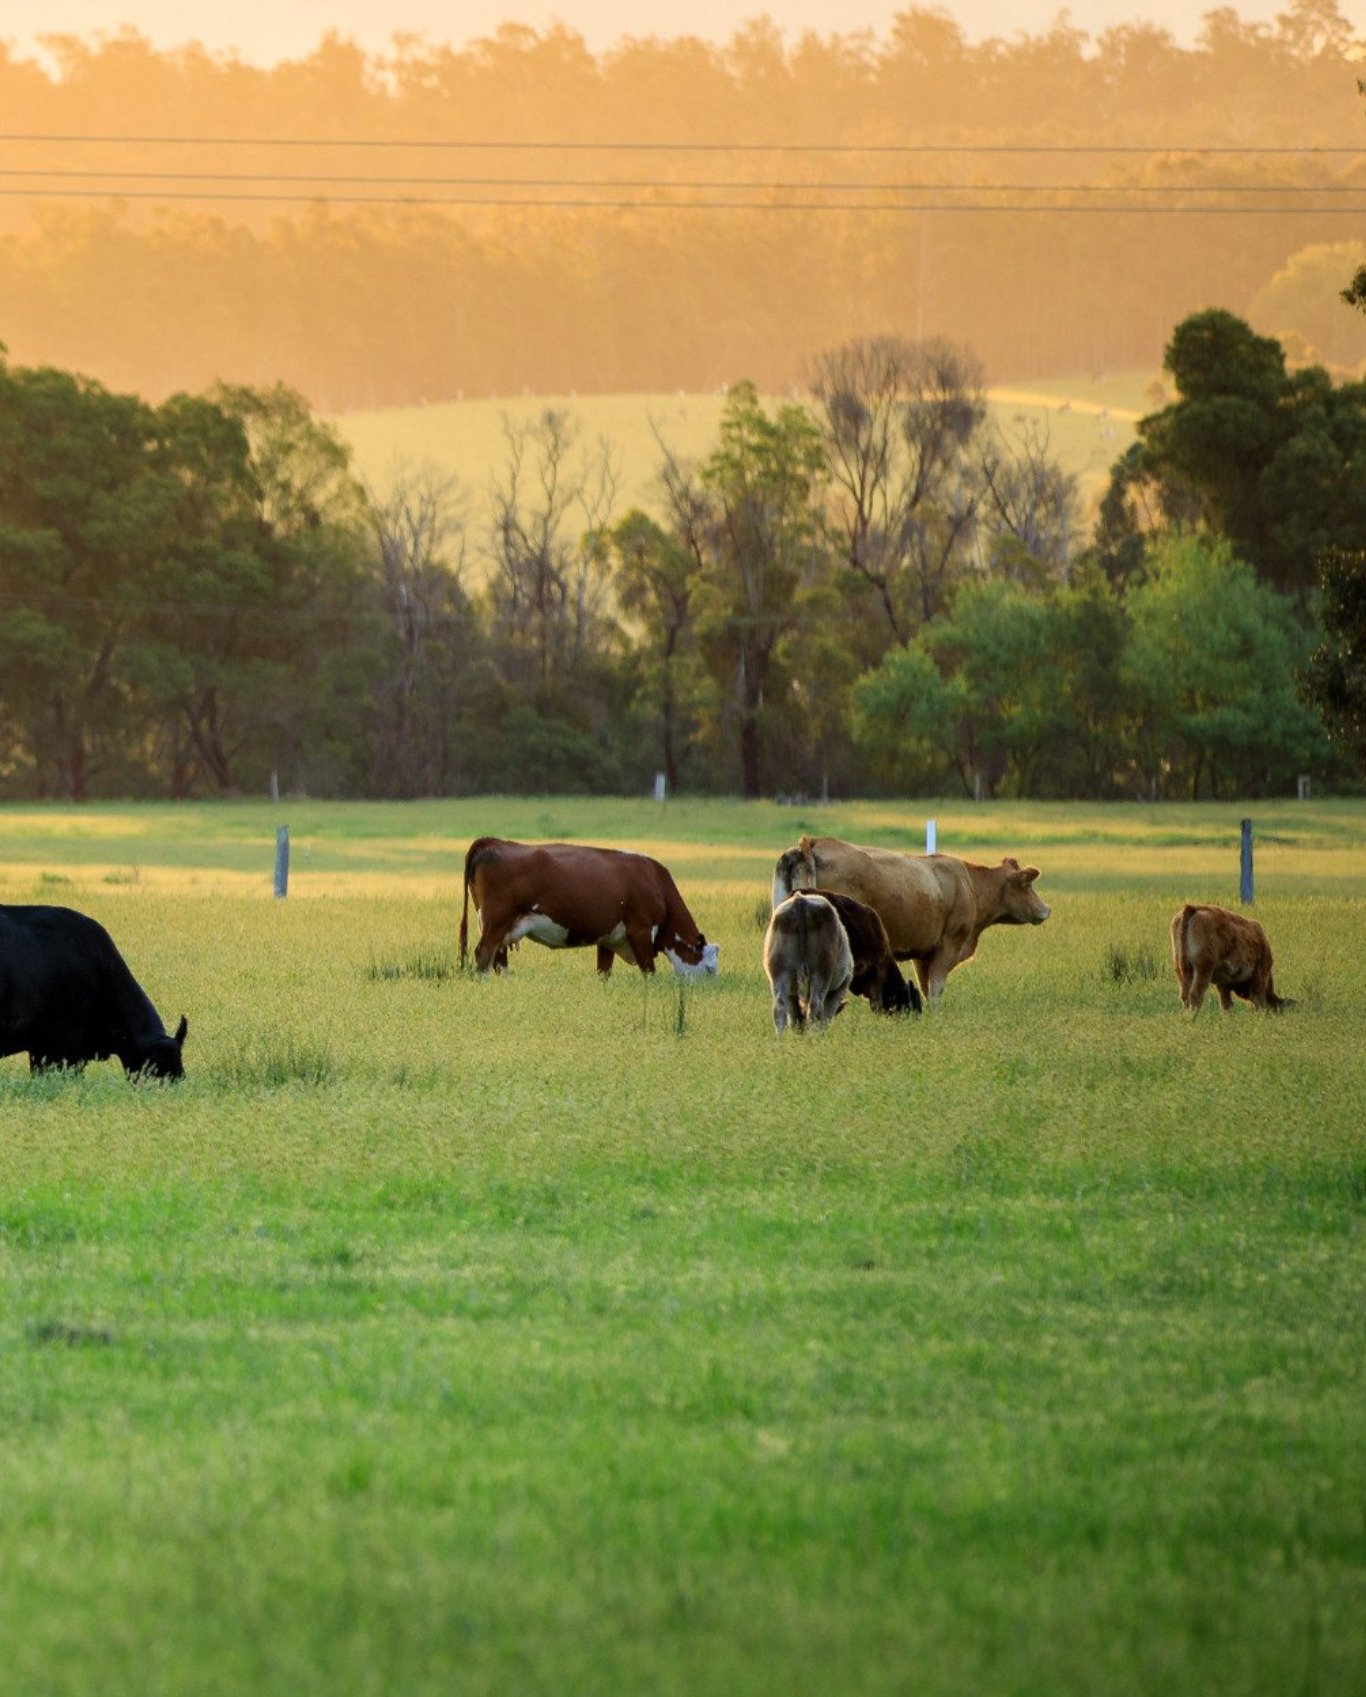 Cows grazing in a pasture